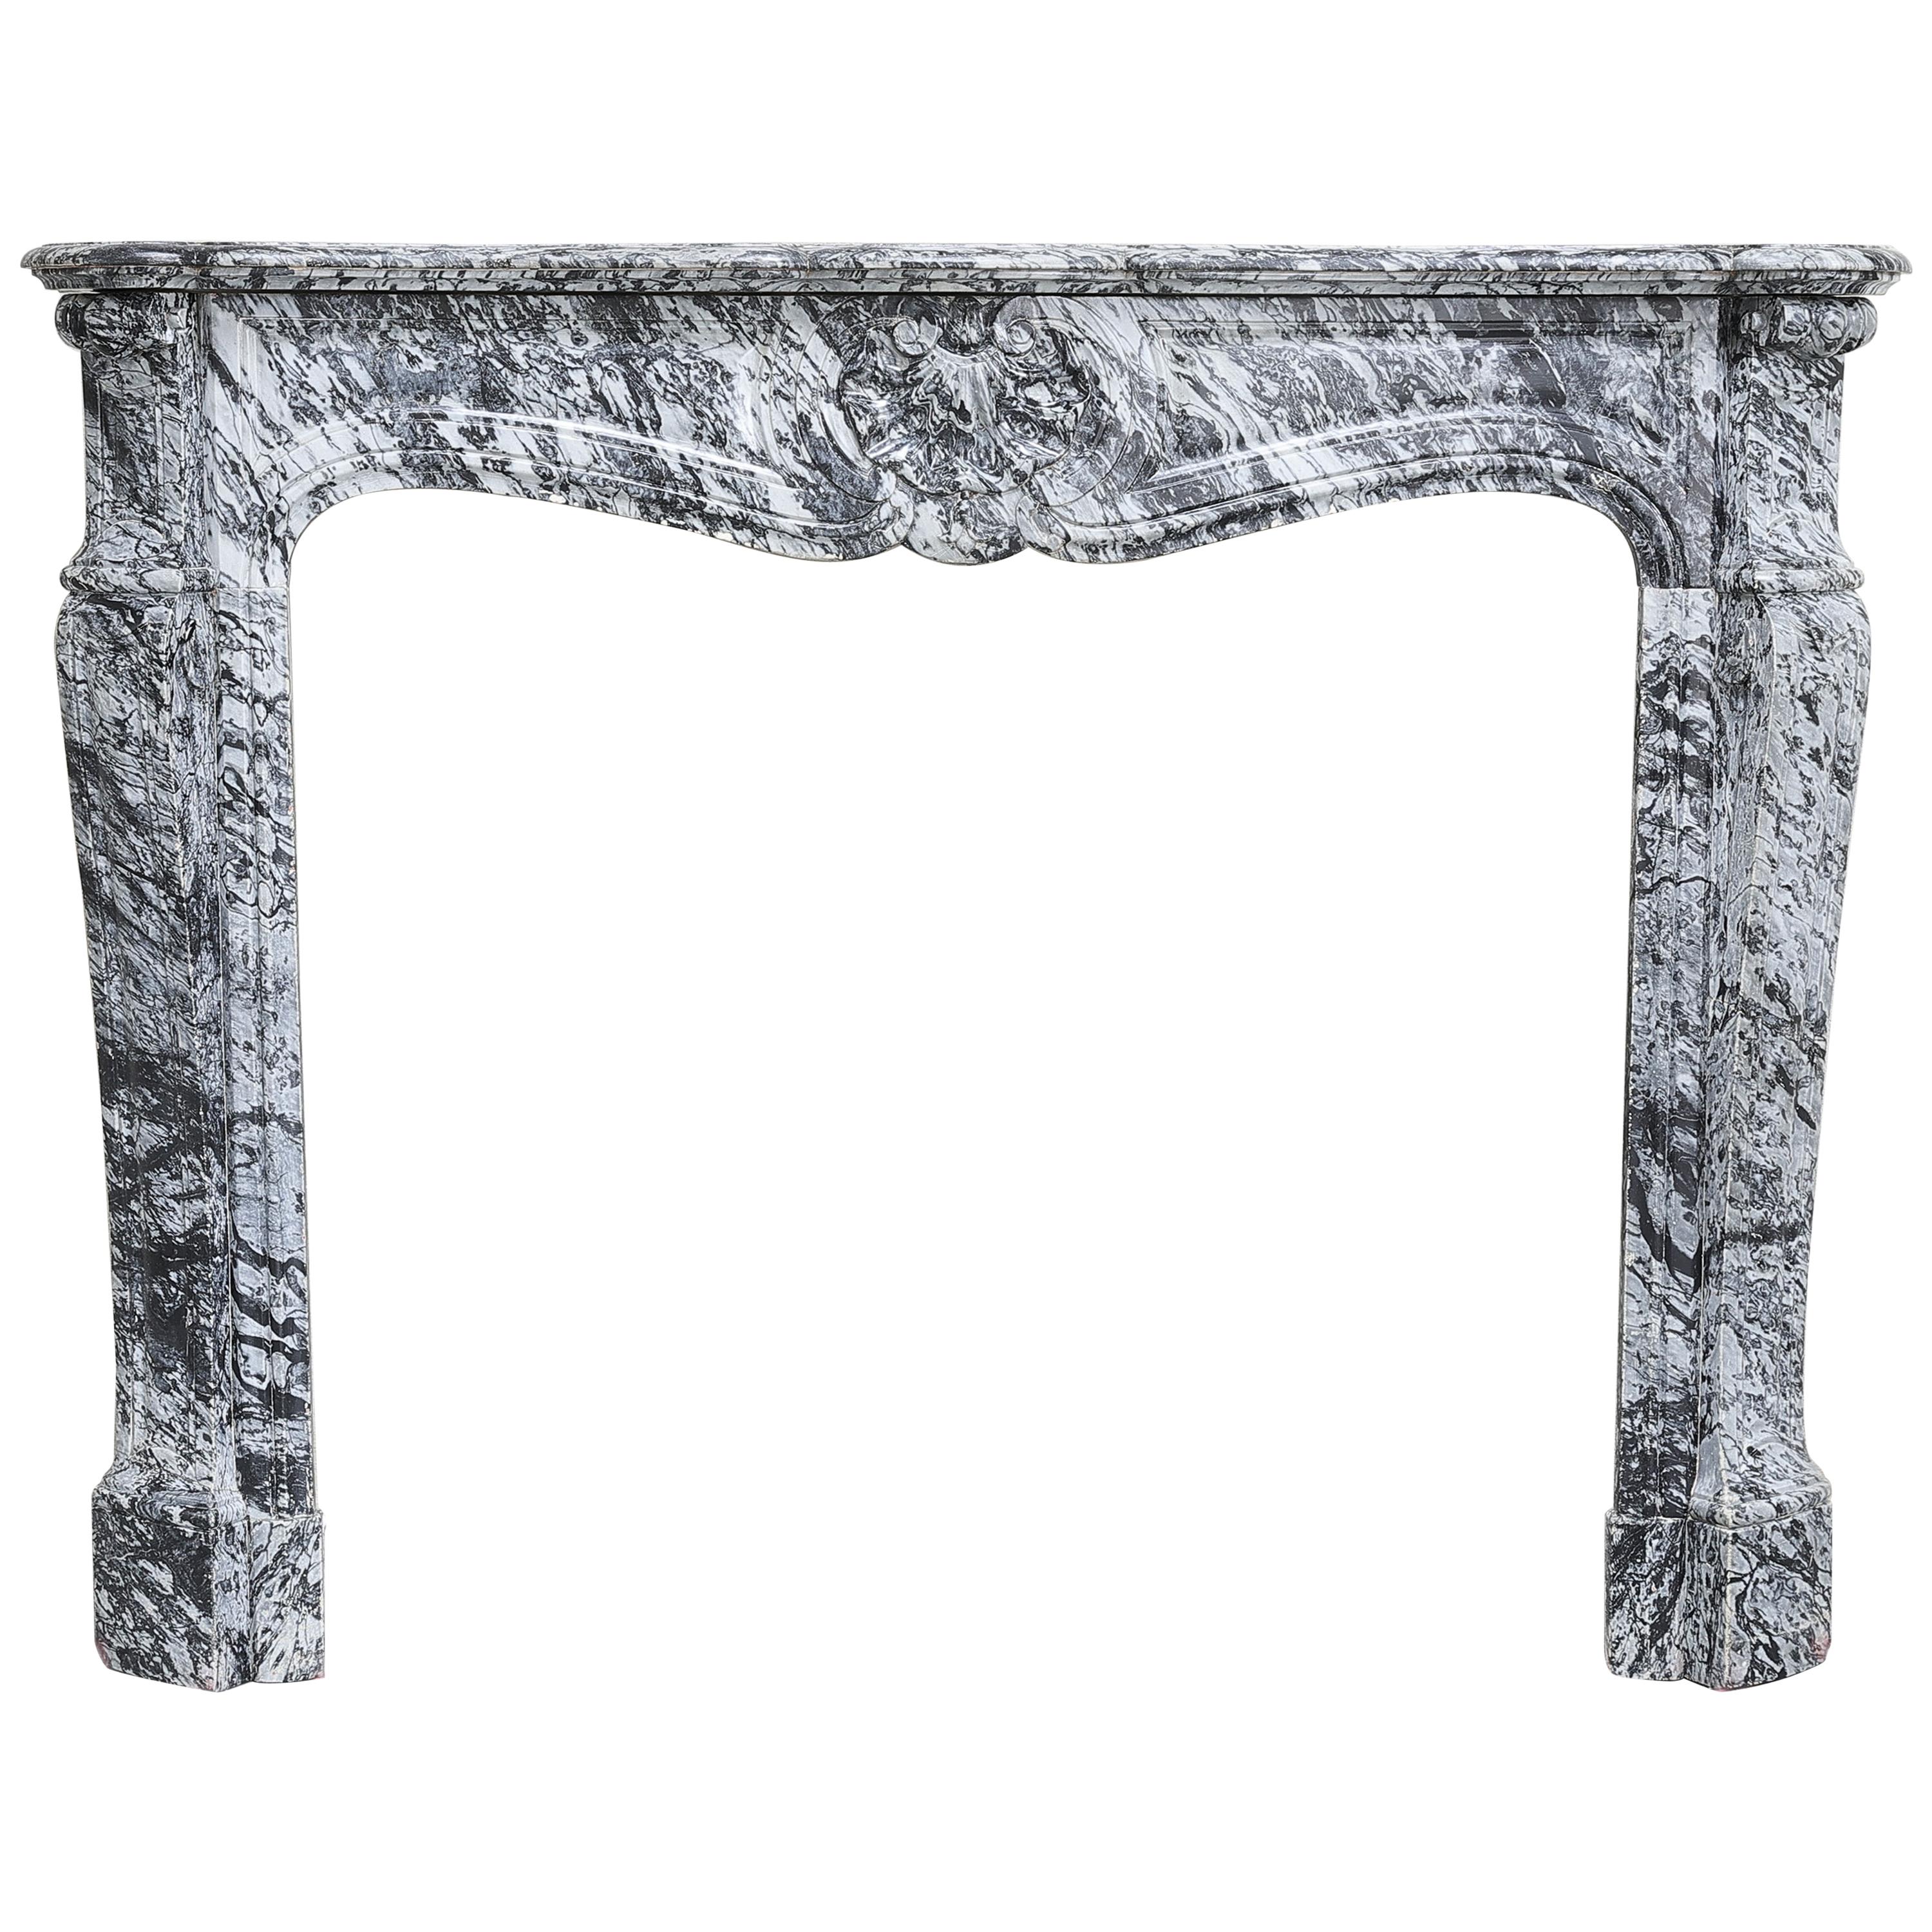 19th Century Mantel Piece in Style of Louis XV of Blue Fleuri Marble